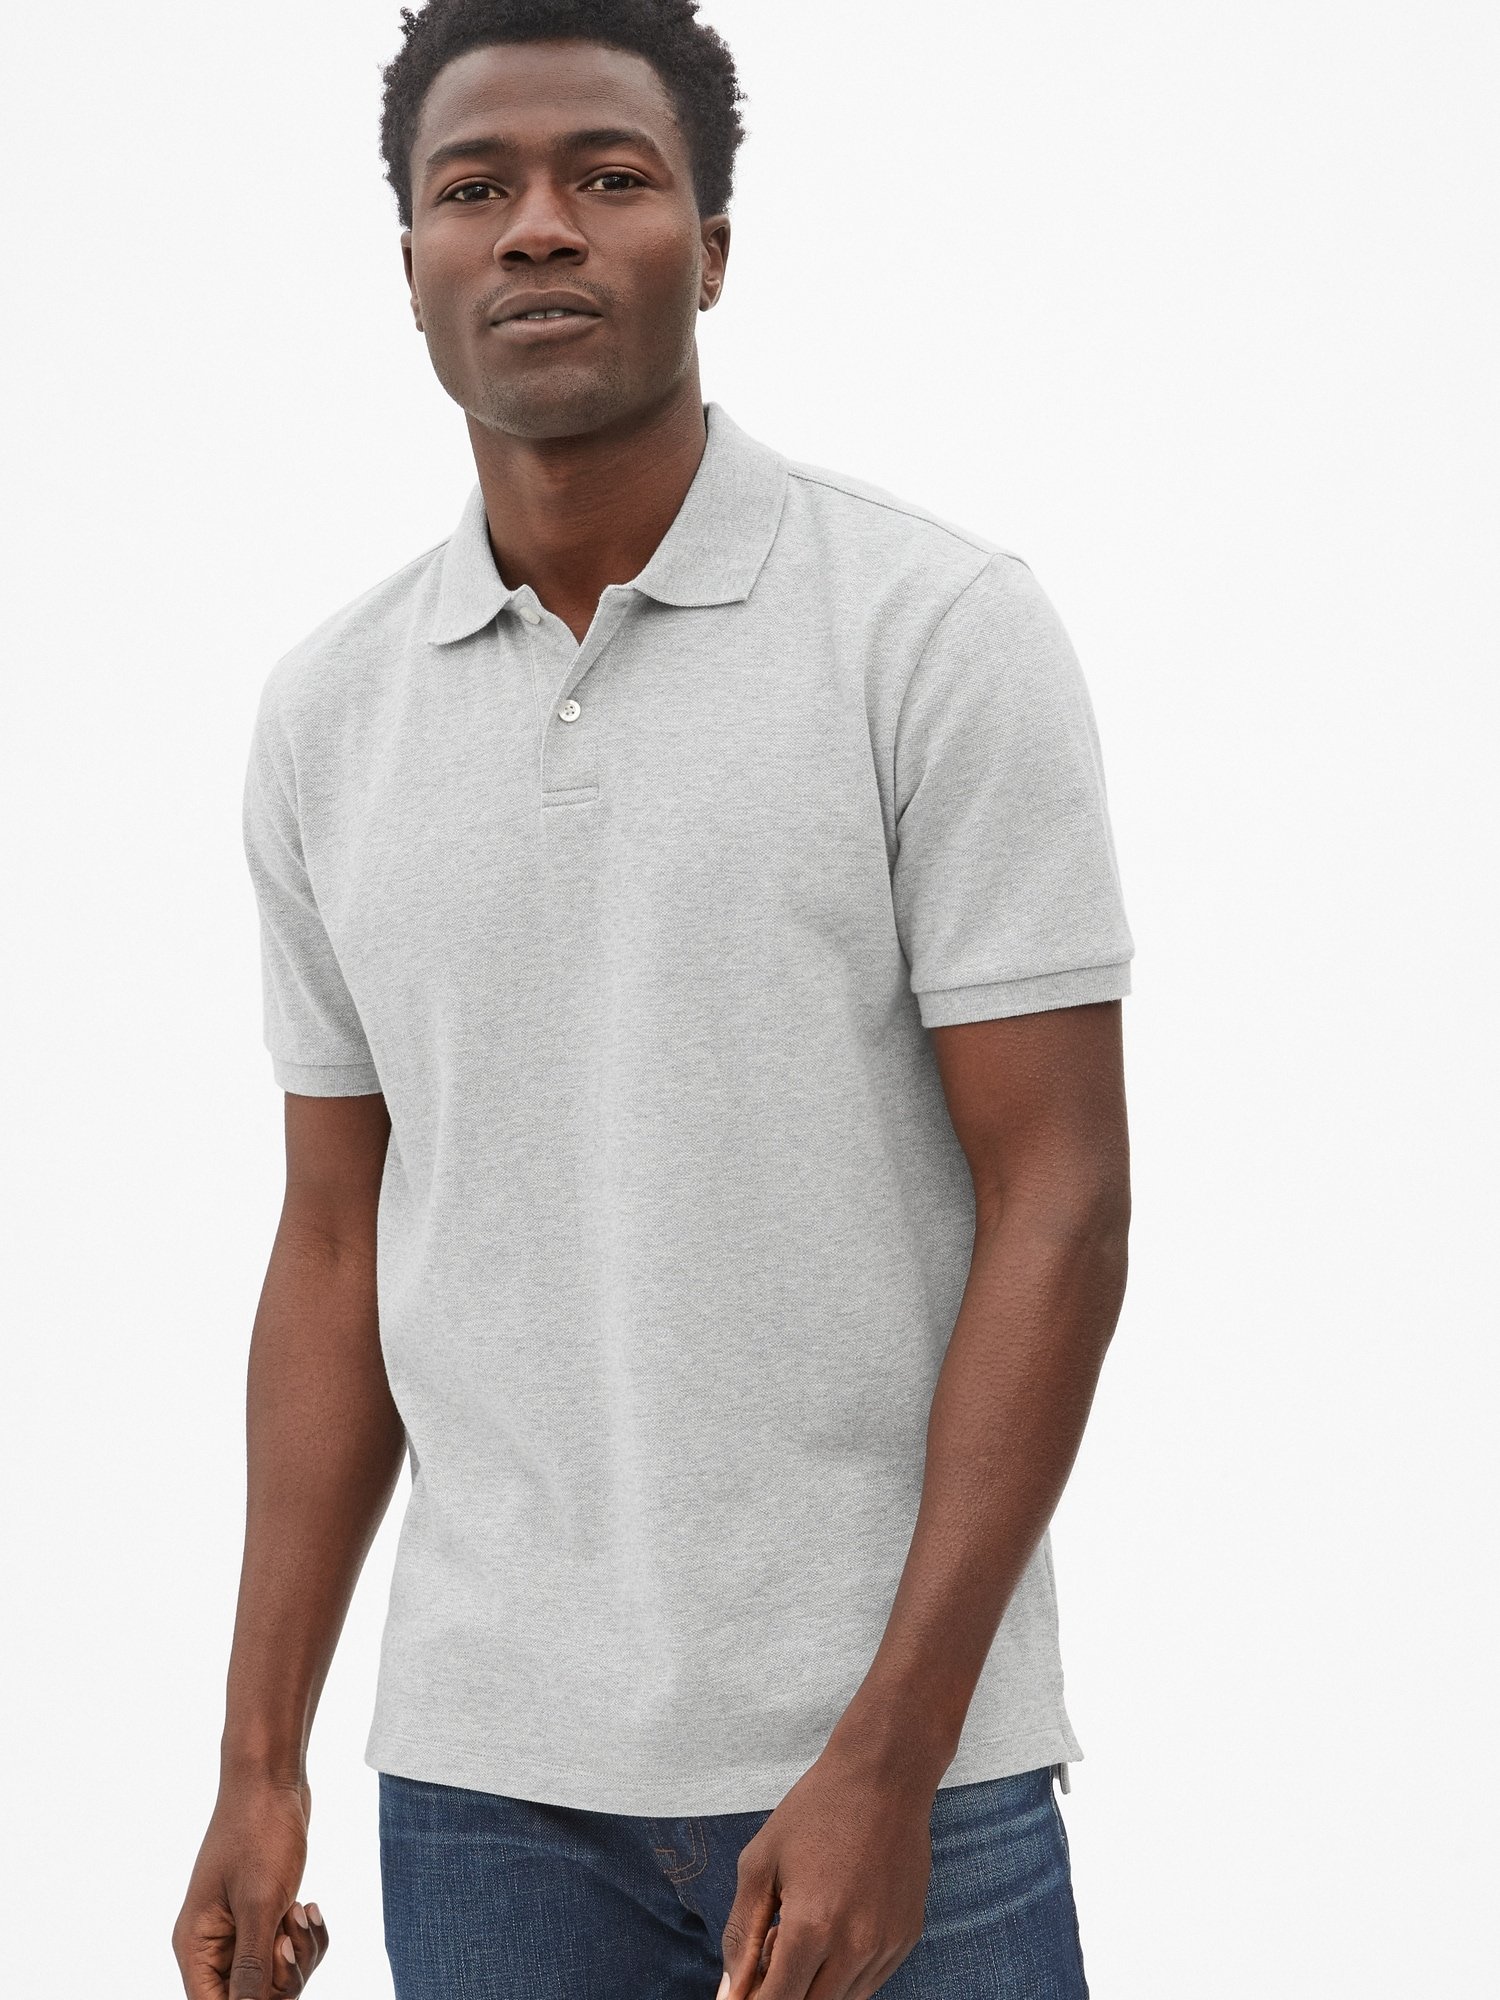 Pique Polo T-Shirt product image